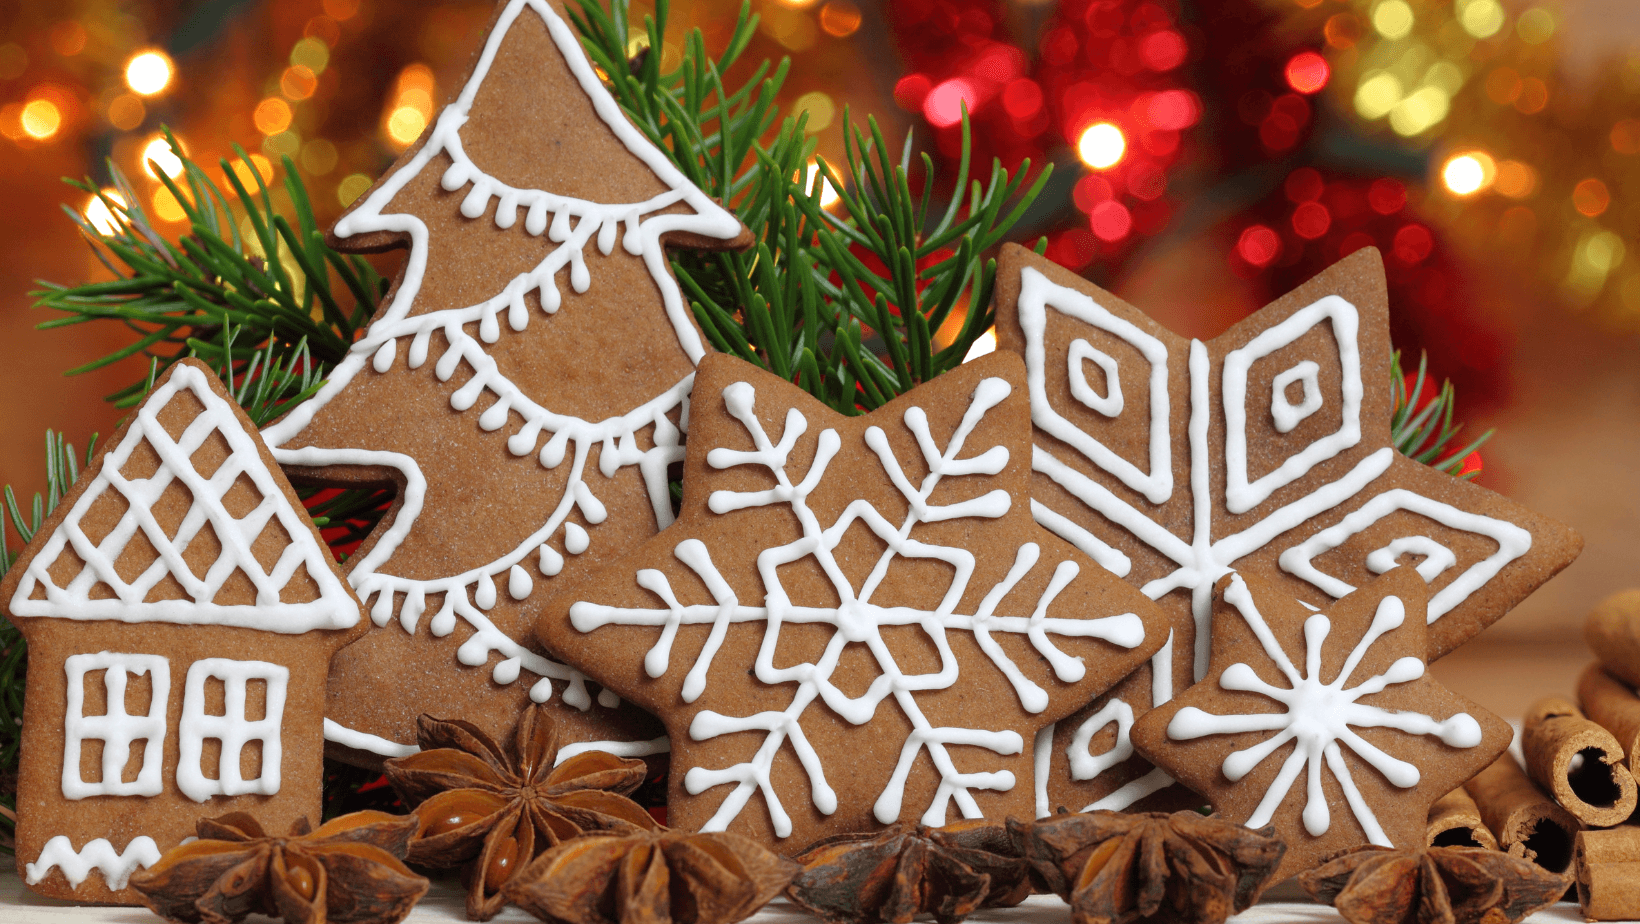 History Of Gingerbread